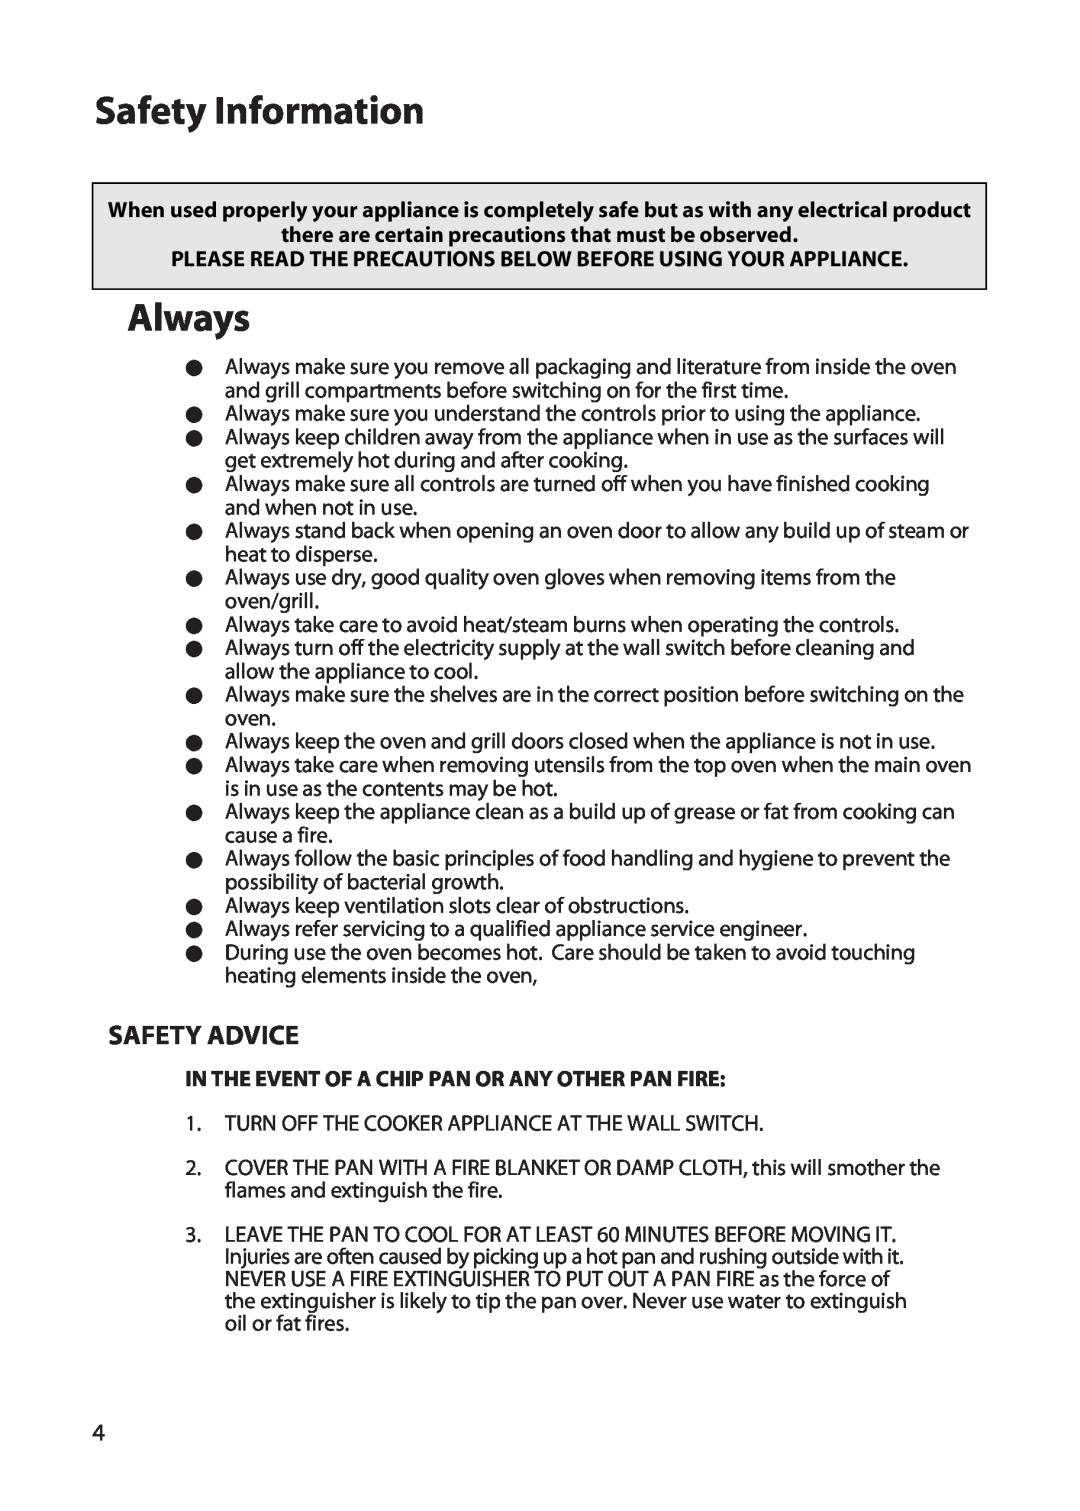 Hotpoint UT47, UD47 manual Safety Information, Always, Safety Advice, In The Event Of A Chip Pan Or Any Other Pan Fire 